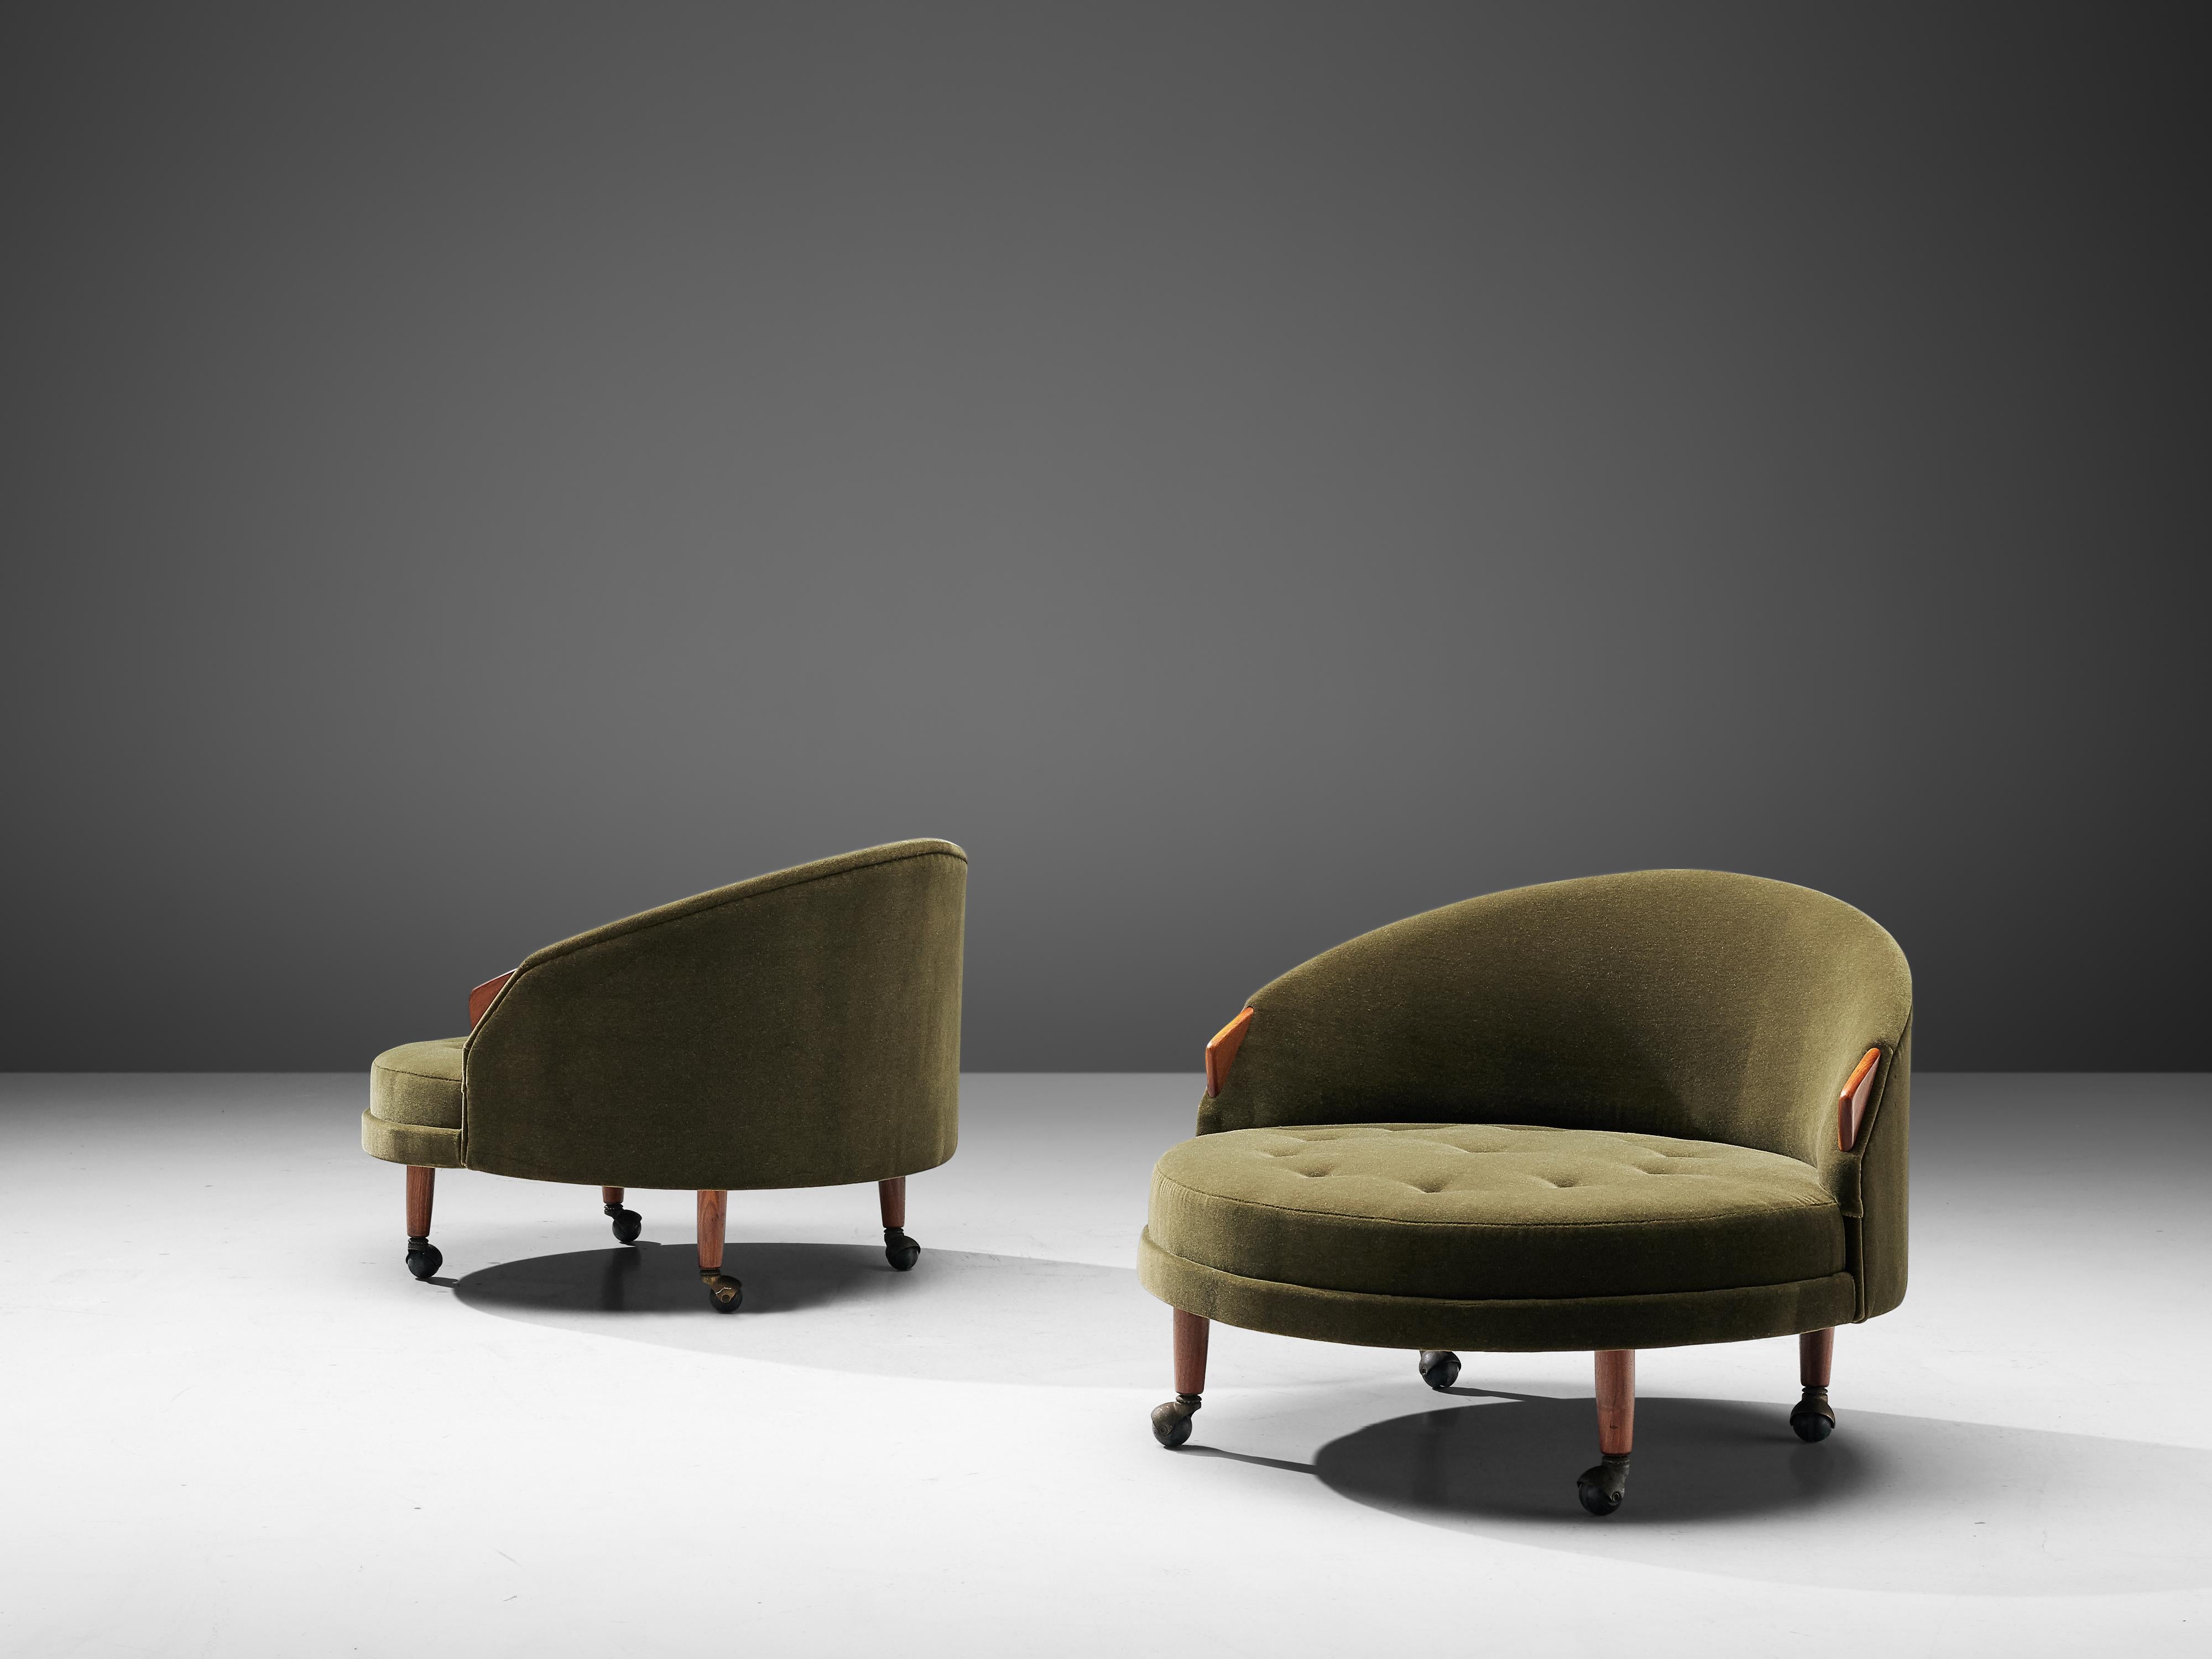 Adrian Pearsall for Craft Associates, pair of 'Havana' lounge chairs, walnut, fabric reupholstery, United States, 1960s

This pair of lounge chairs with small walnut armrests and wheels underneath, is designed by Adrian Pearsall for Craft